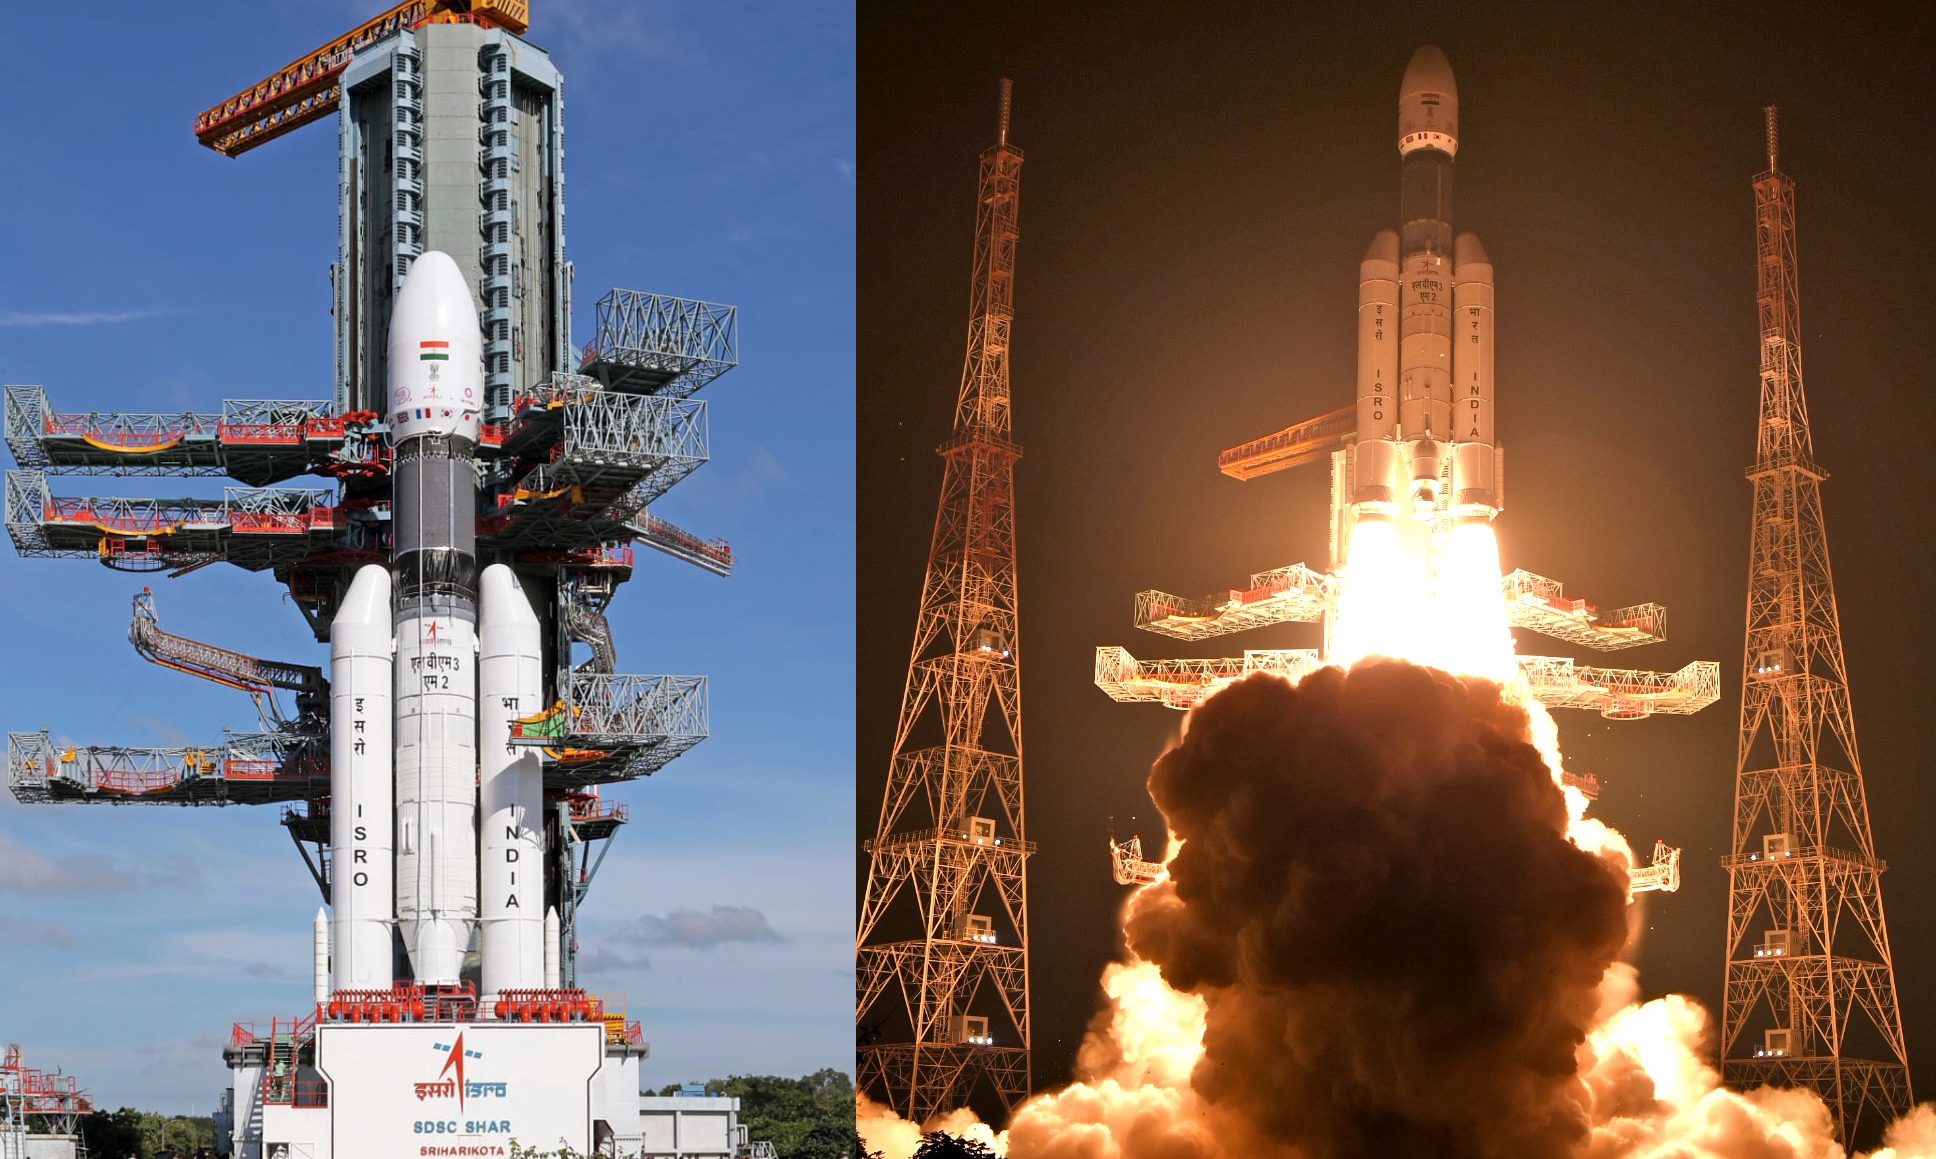 ISRO successfully launches 36 satellites in its heaviest LVM3-M2 rocket